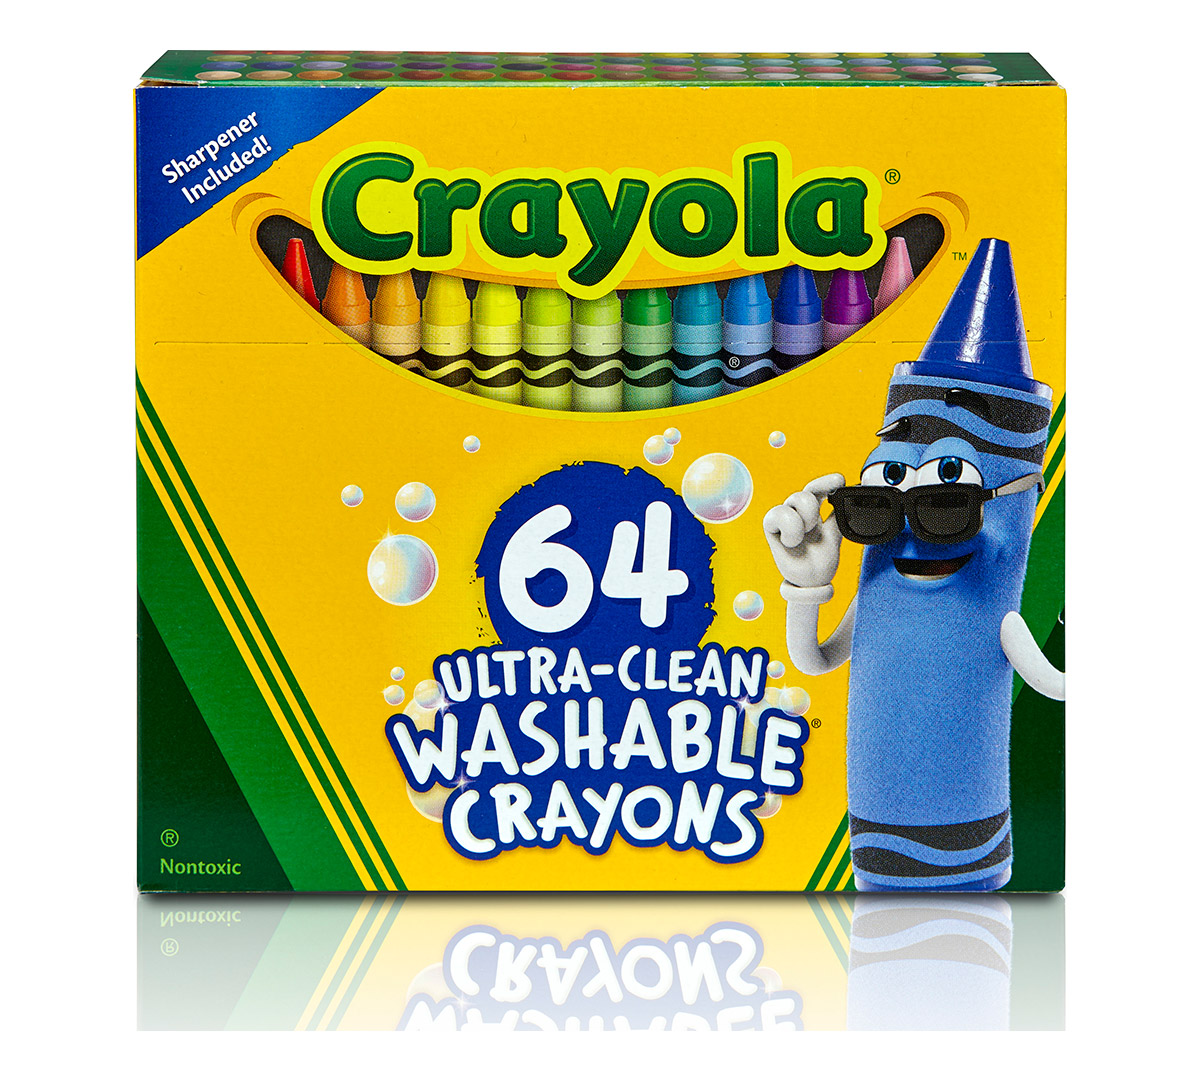 Download Crayola Ultra-Clean Washable Crayons; 64 count; Art Tools; Home or School; Everyday Creativity ...